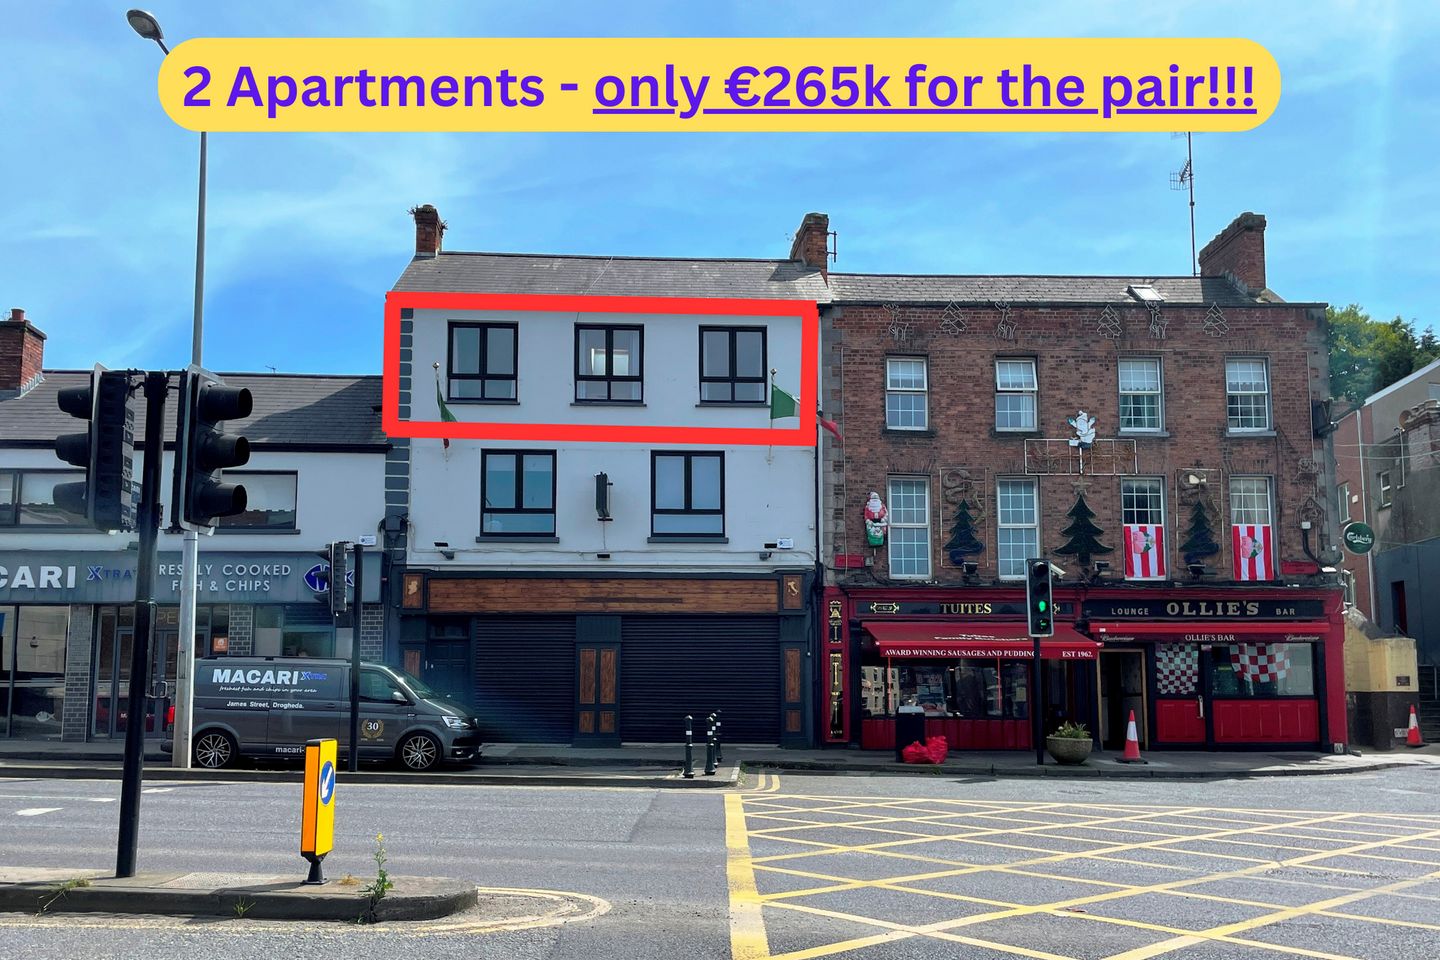 Apartments 1& 2, 35 / 36 James St, Drogheda, Co. Louth, A92WP3C